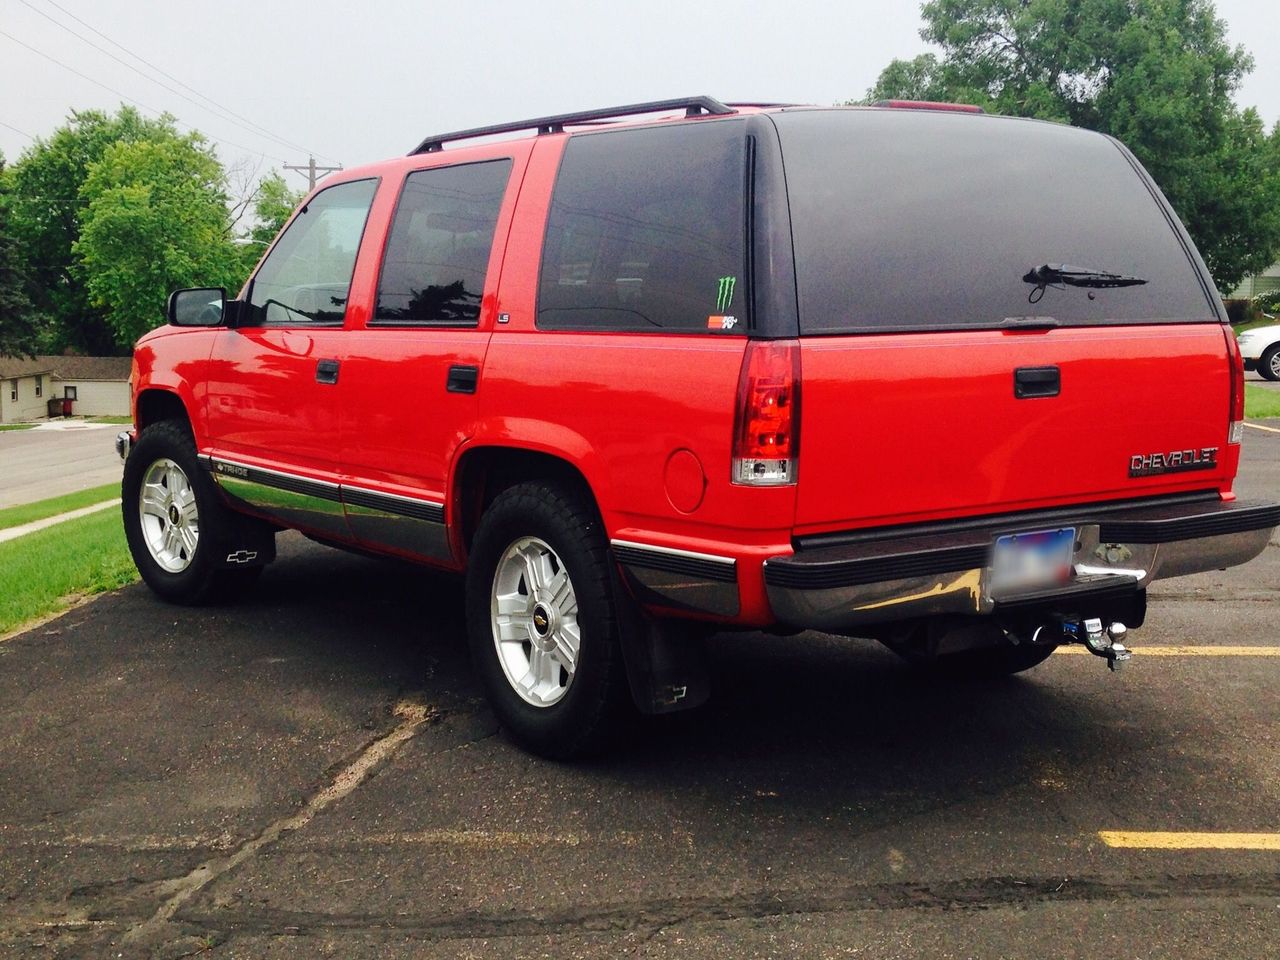 1999 Chevrolet Tahoe LS | Sioux Falls, SD, Victory Red (Red & Orange), 4 Wheel